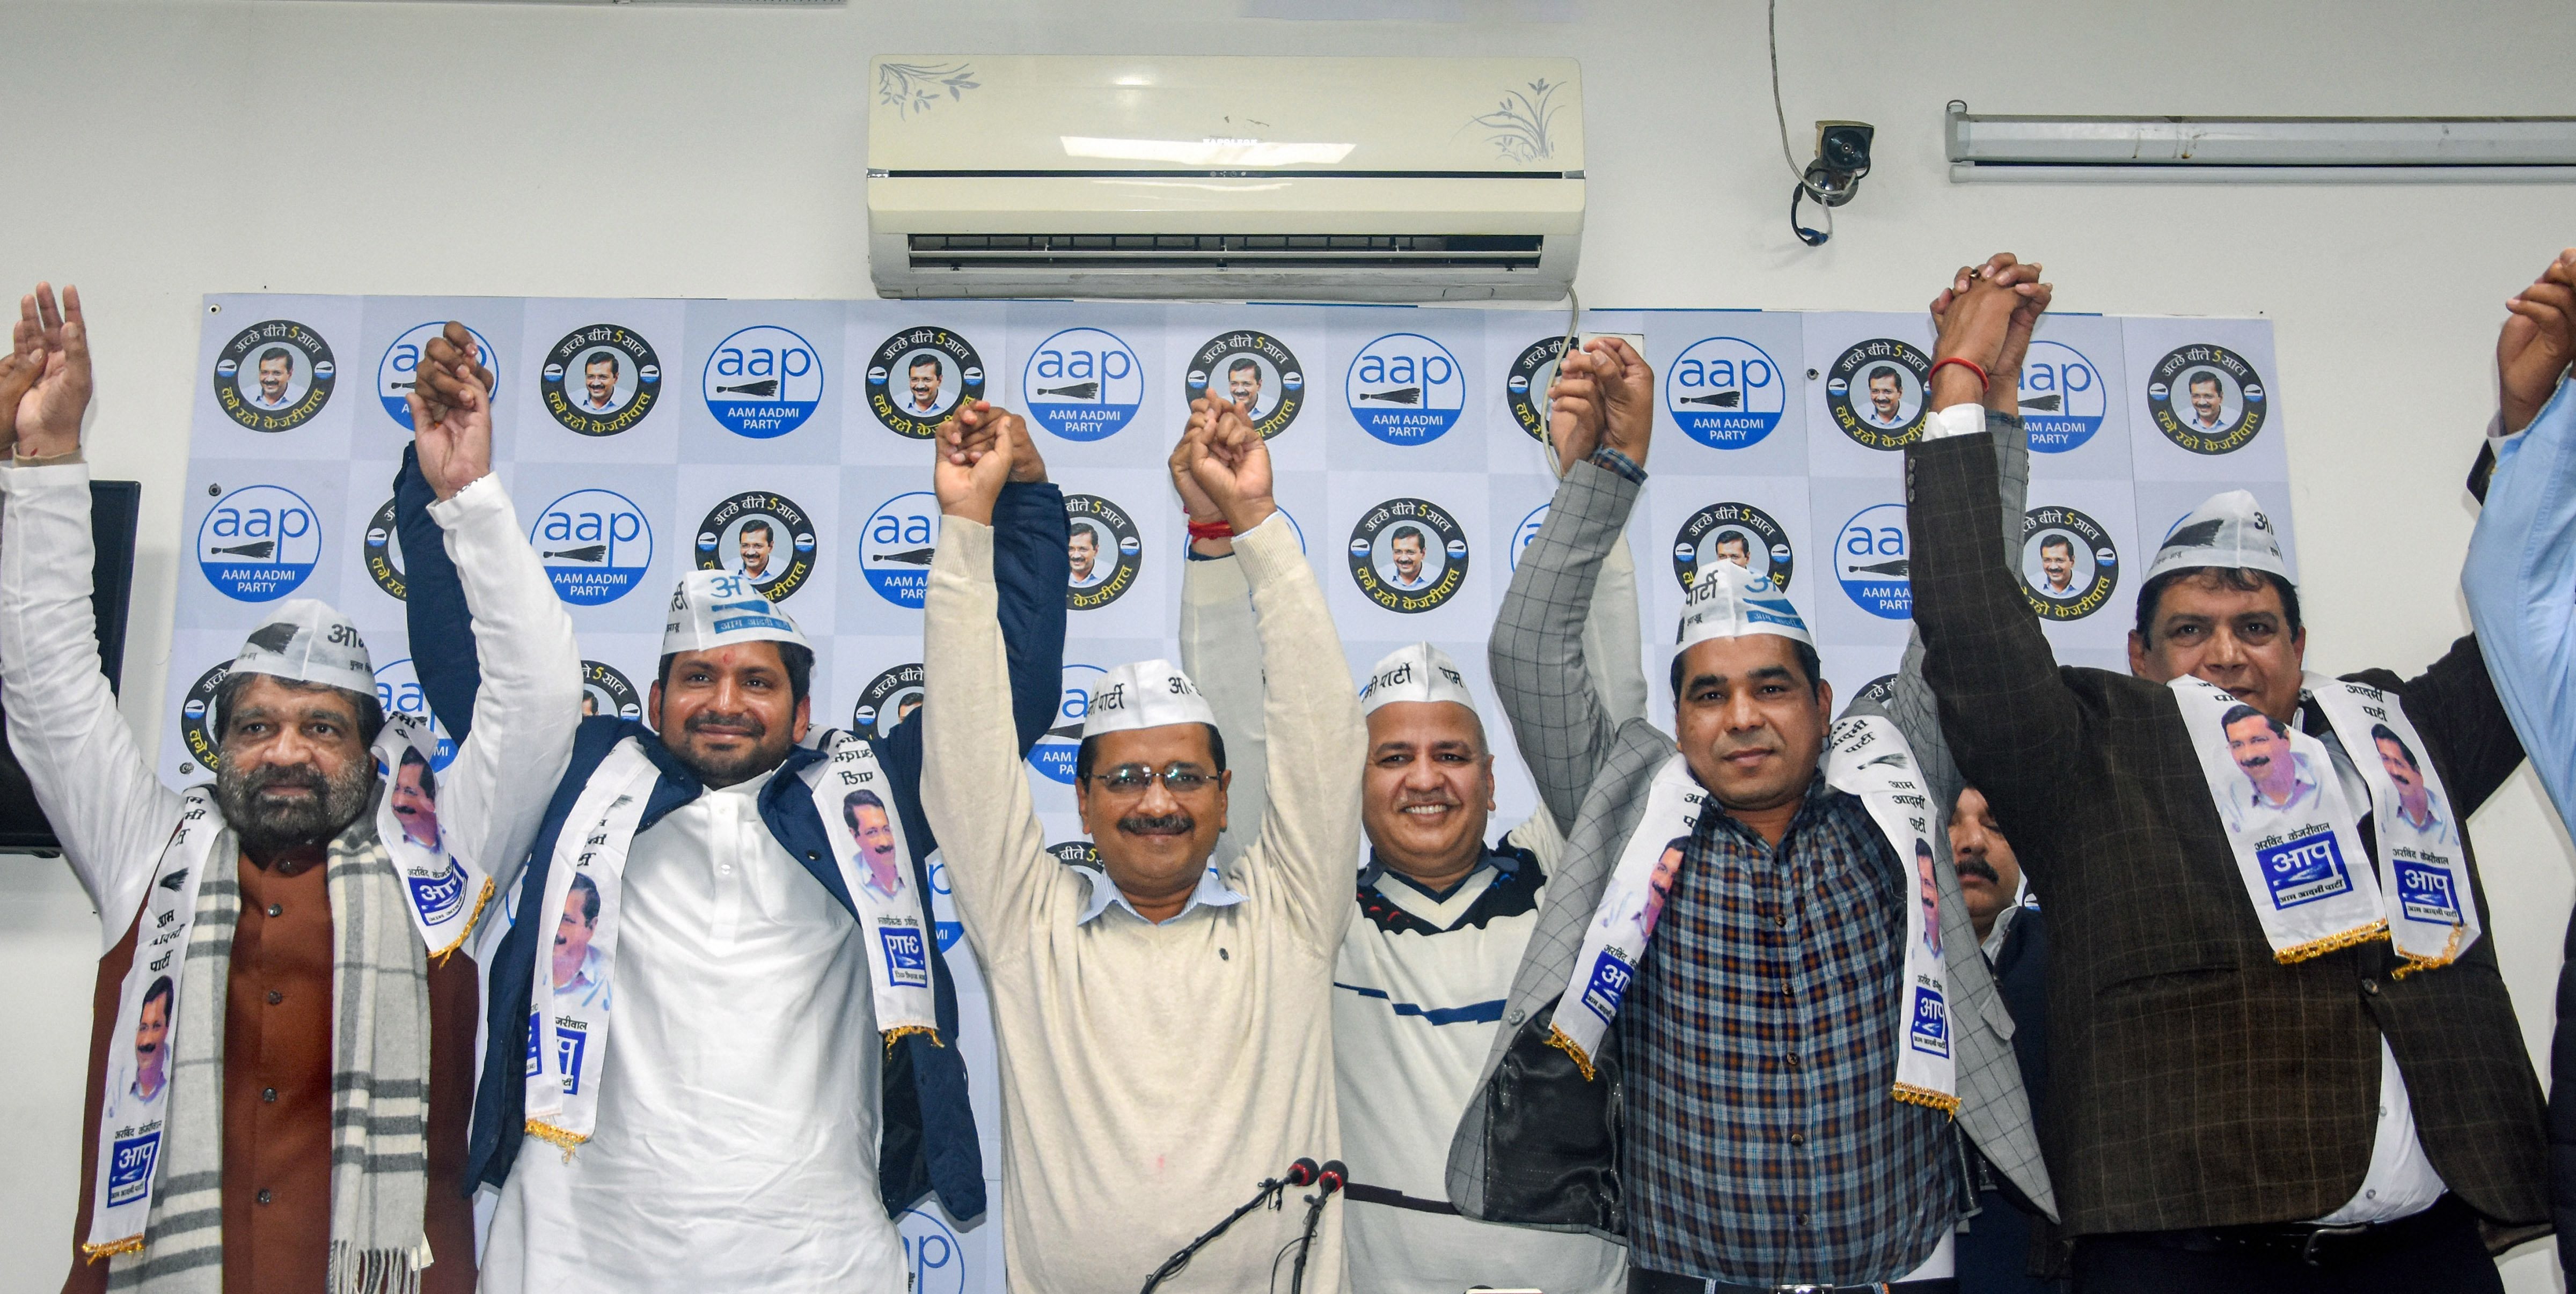 Vinay Mishra (2L), son of former Congress leader Mahabal Mishra, and former Badarpur MLA Ram Singh Netaji (L) join hands with Delhi CM Arvind Kejriwal, deputy CM Manish Sisodia and others after formally joining the AAP, in New Delhi, Monday, January 13, 2020.